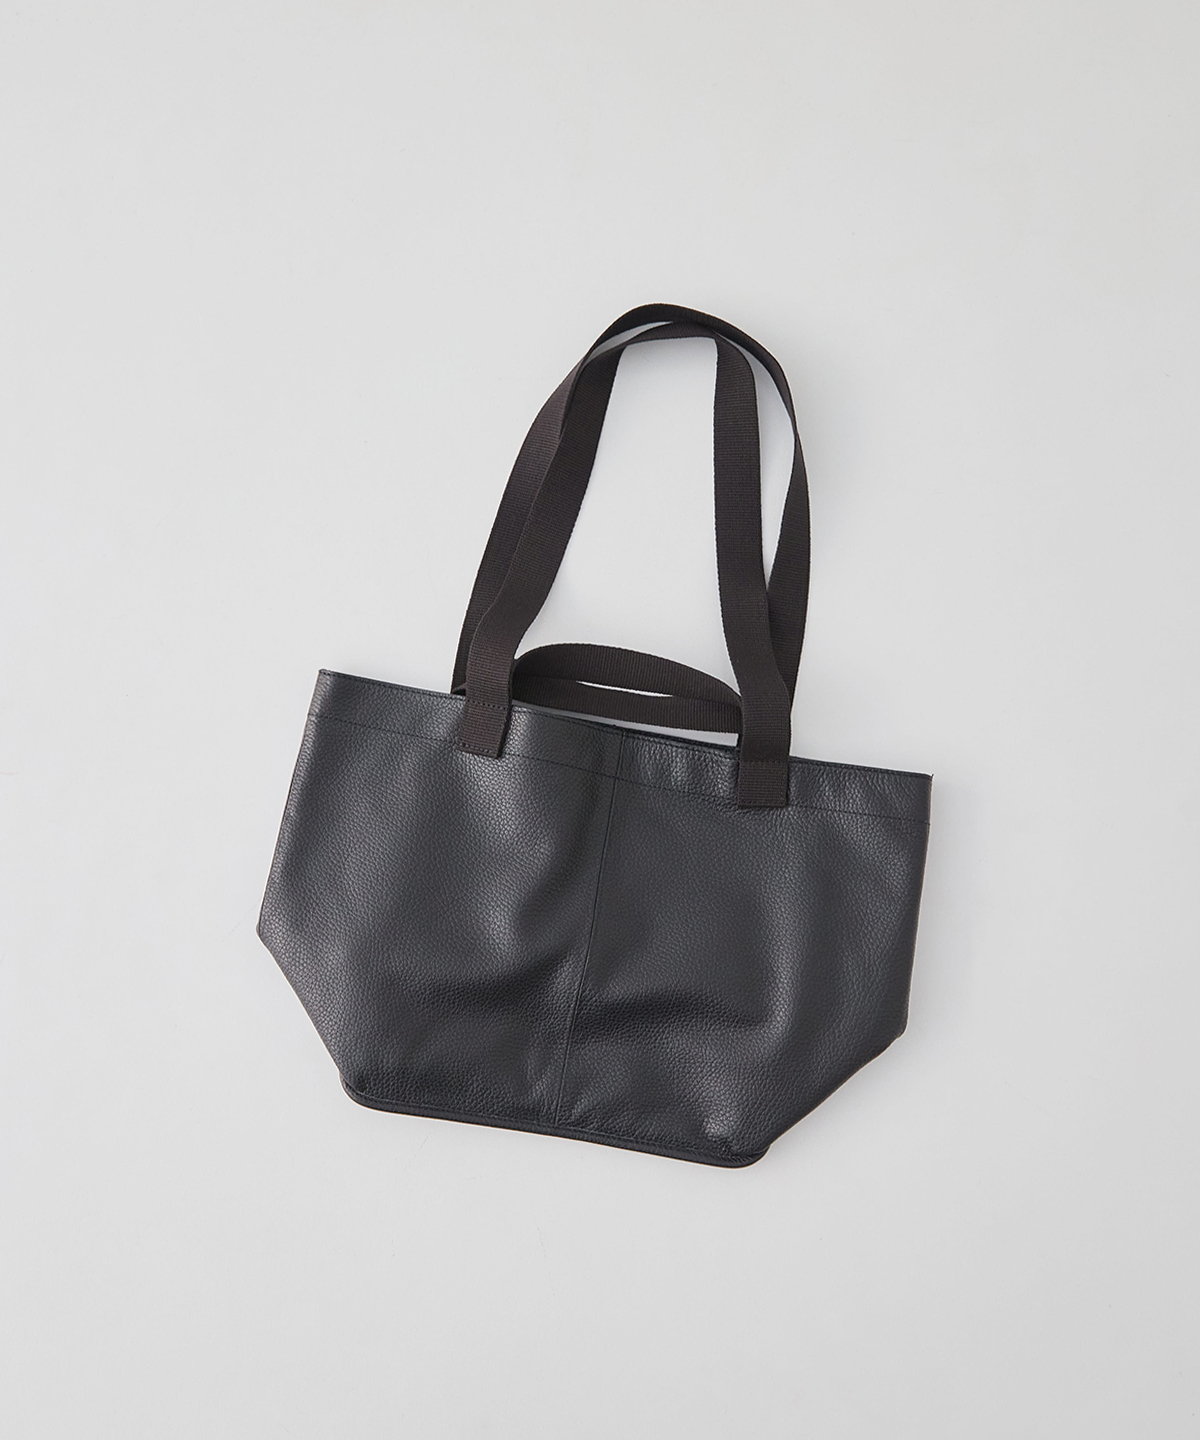 TIDI DAY】LEATER TOTE BAG｜nest Robe ONLINE SHOP